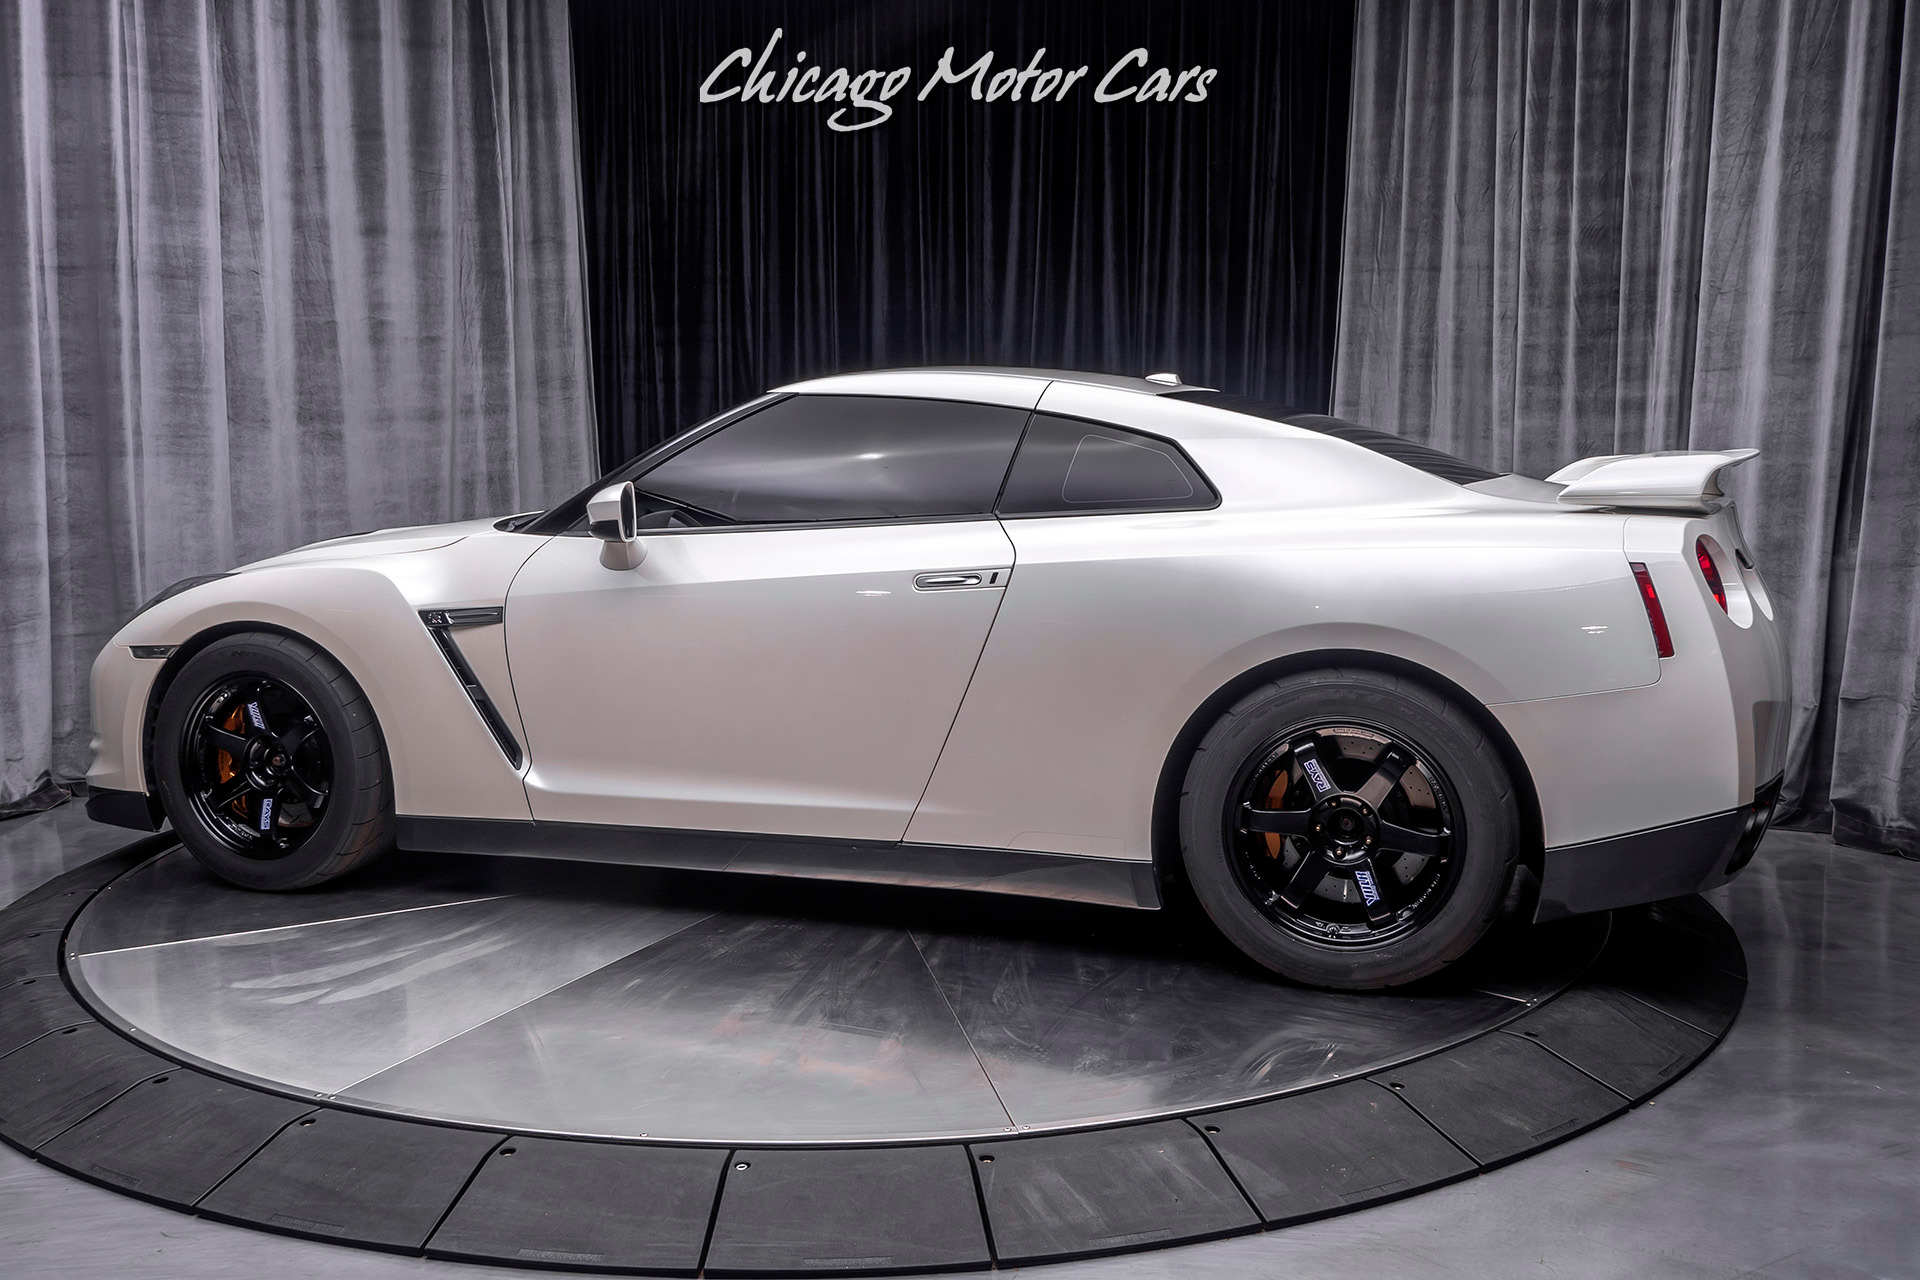 Used-2010-Nissan-GT-R-Premium-Coupe-1400-Horsepower-BUILT-BY-BOOSTIN-PERFORMANCE